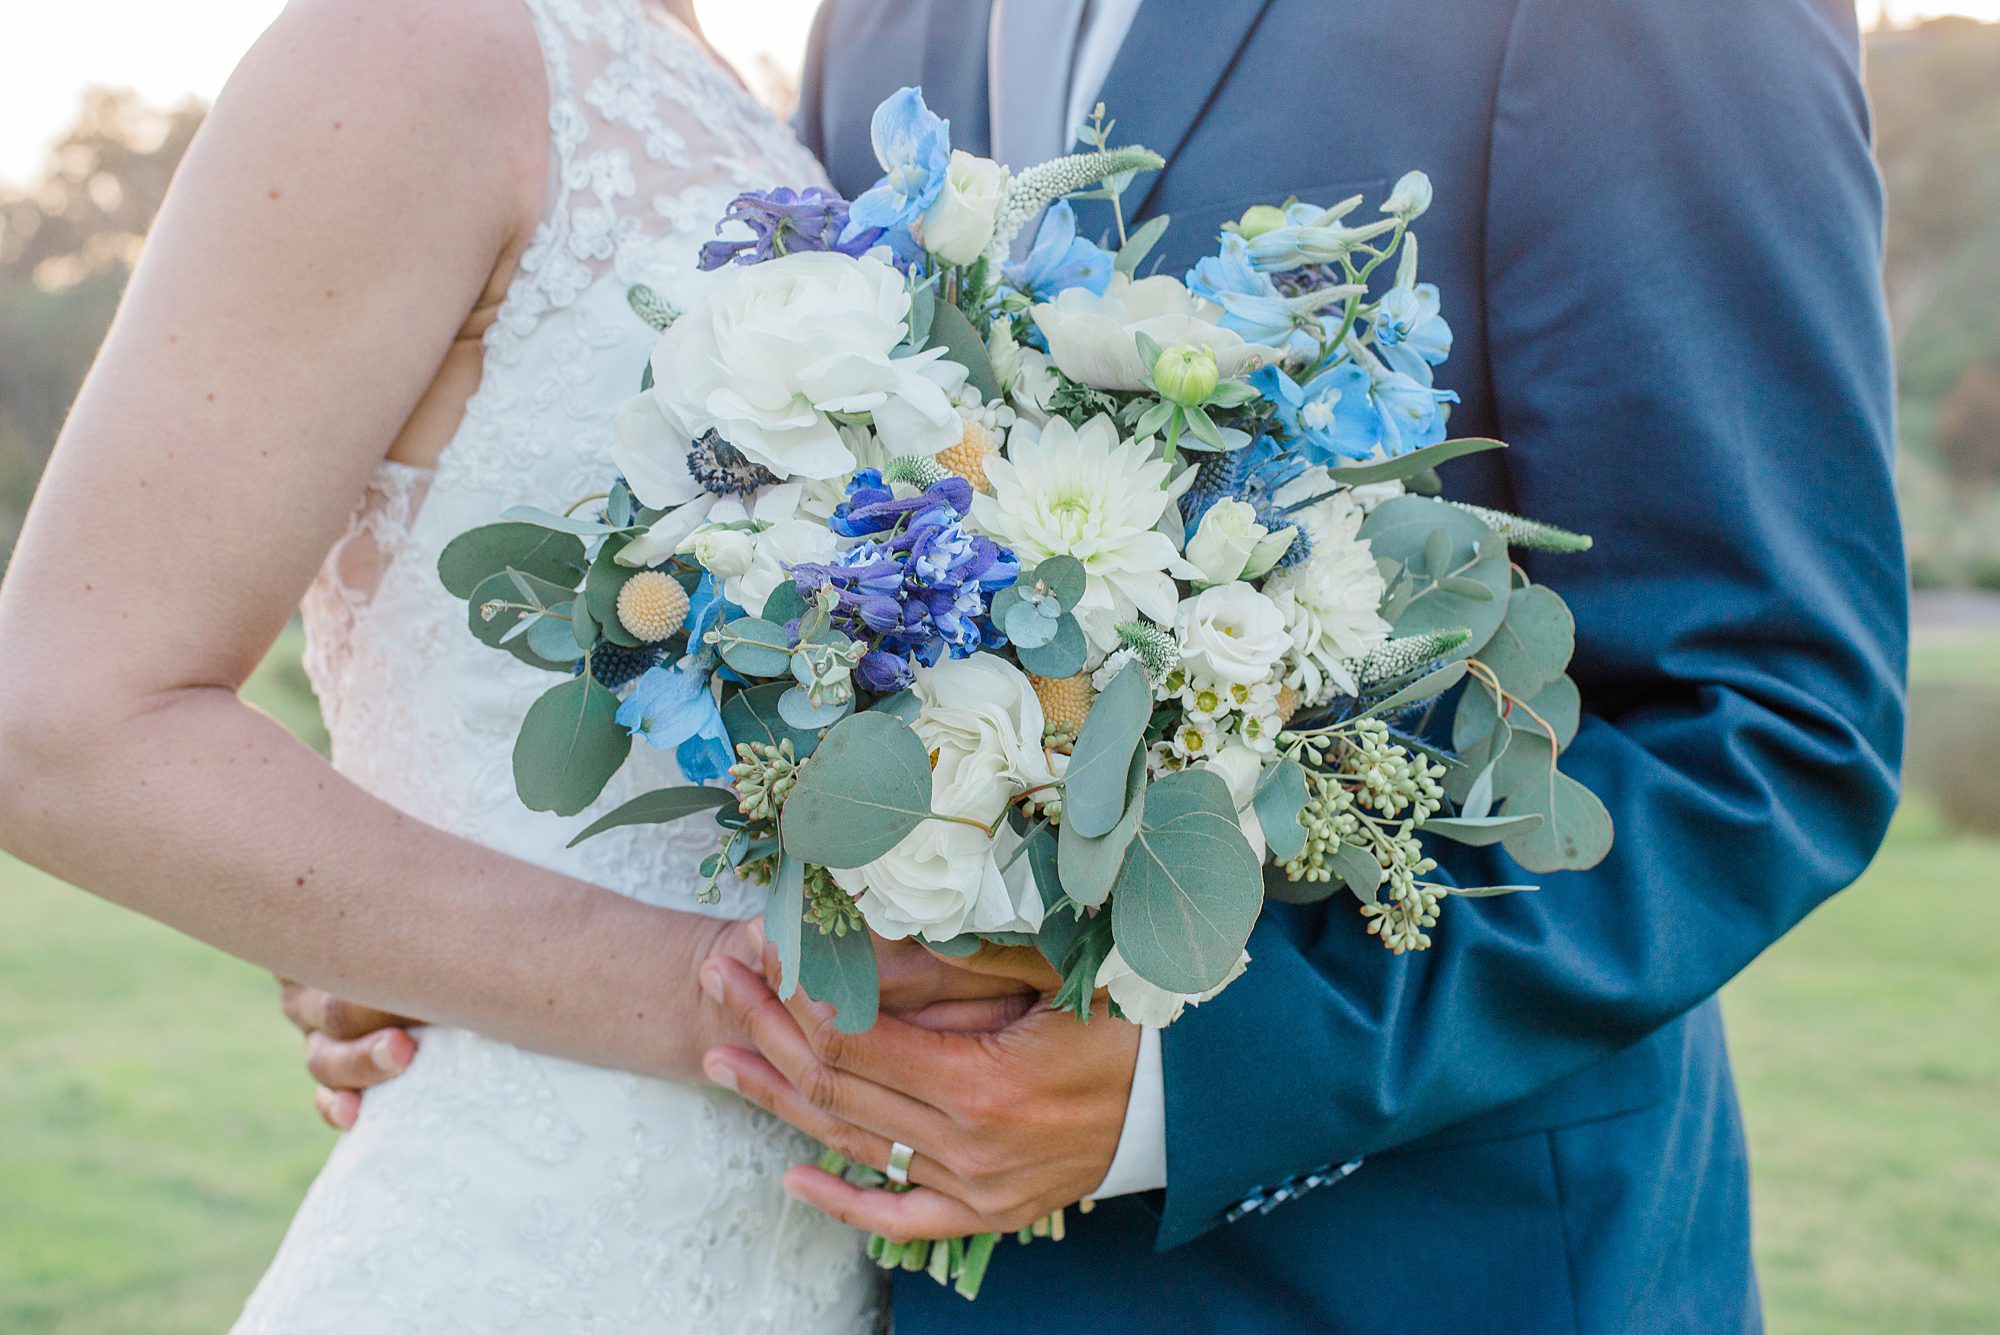 bride and groom together after wedding holding bouquet